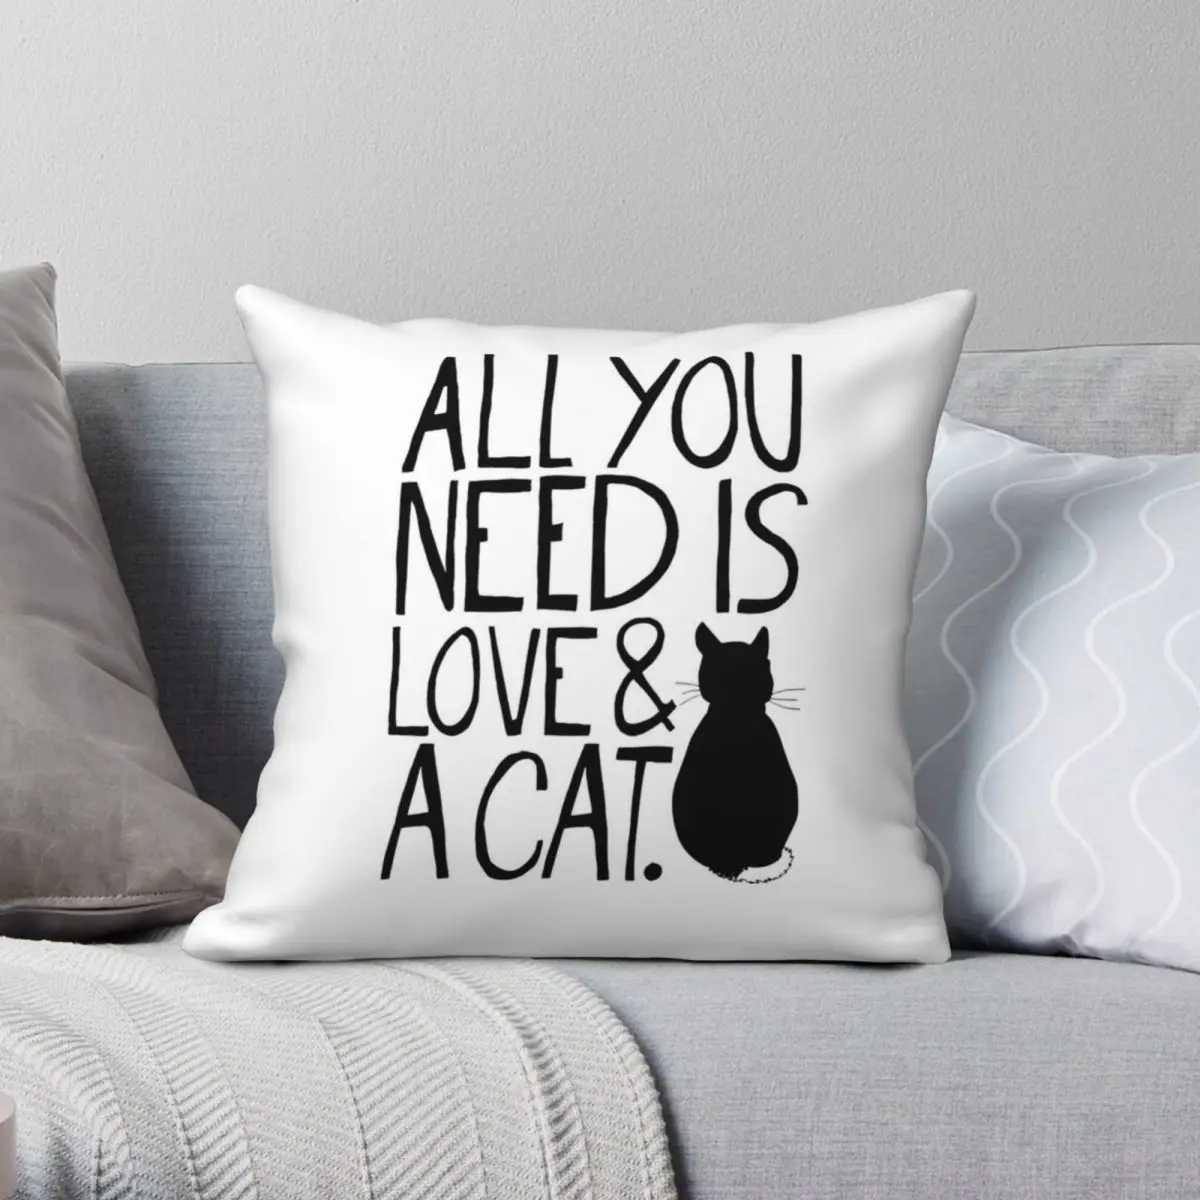 

All You Need Is Love And A Cat Square Pillowcase Polyester Linen Velvet Printed Decorative Throw Pillow Case Home Cushion Cover